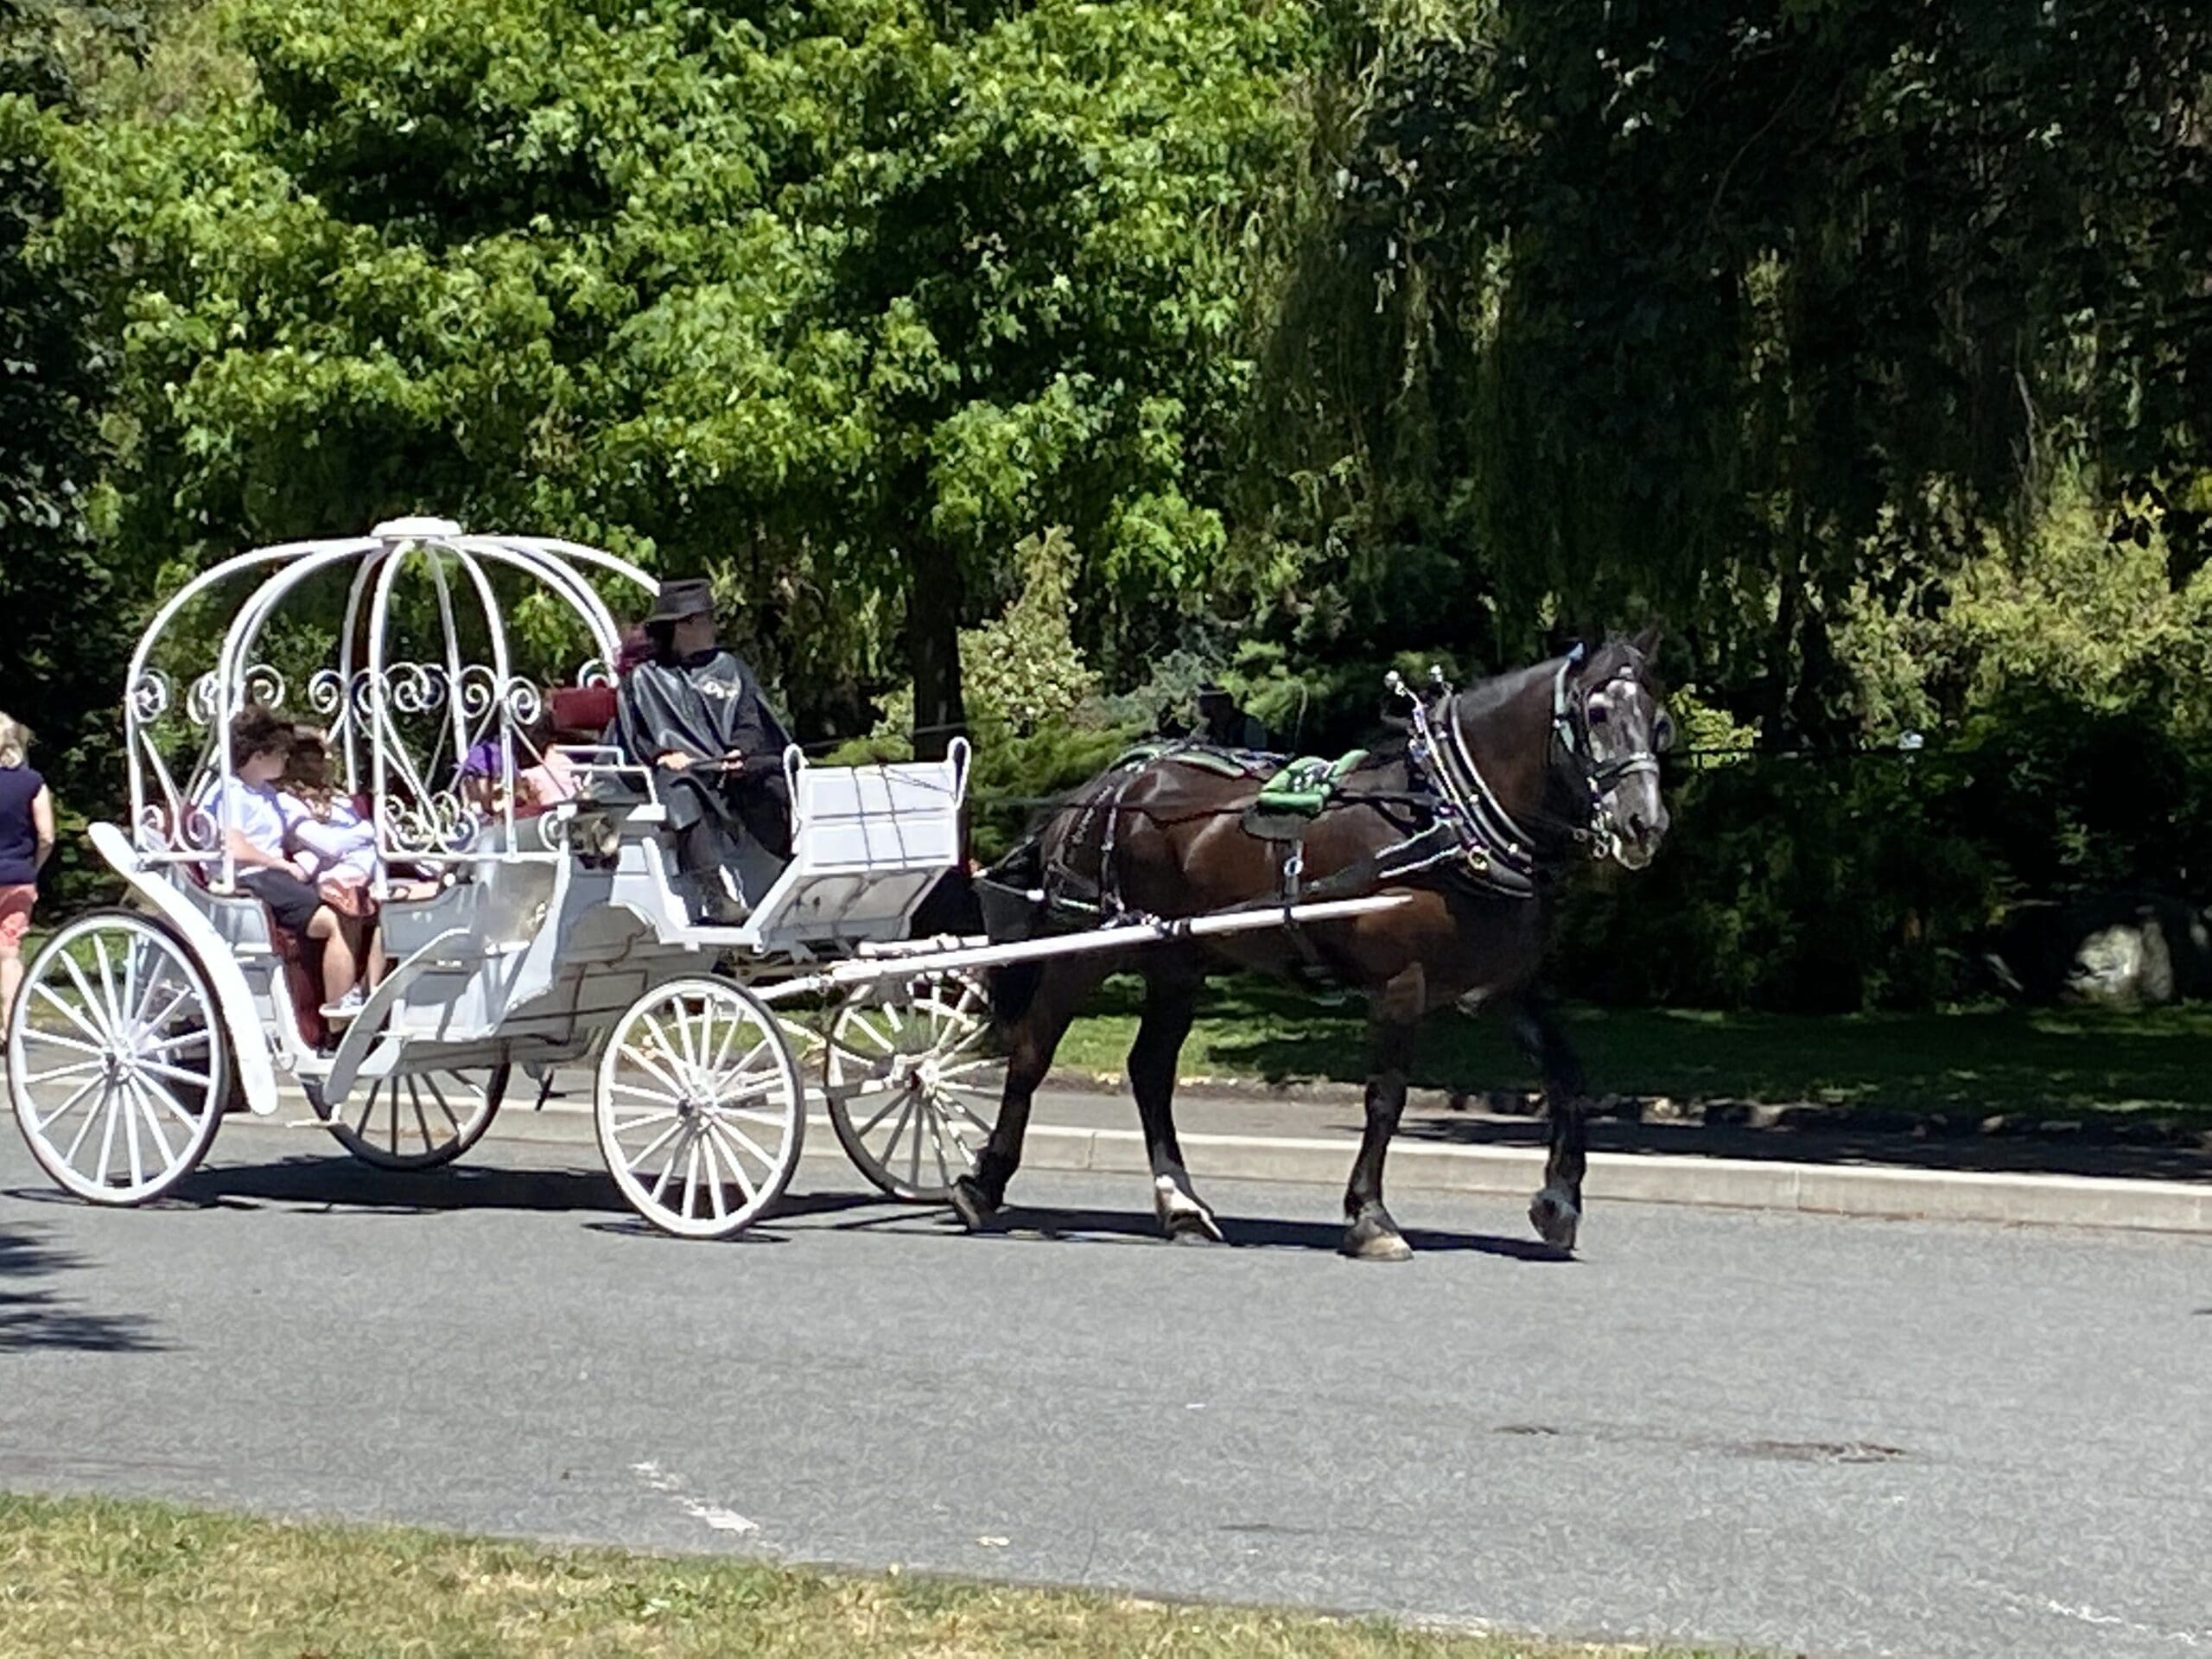 A horse and carriage ride is a favourite activity at Beacon Hill Park